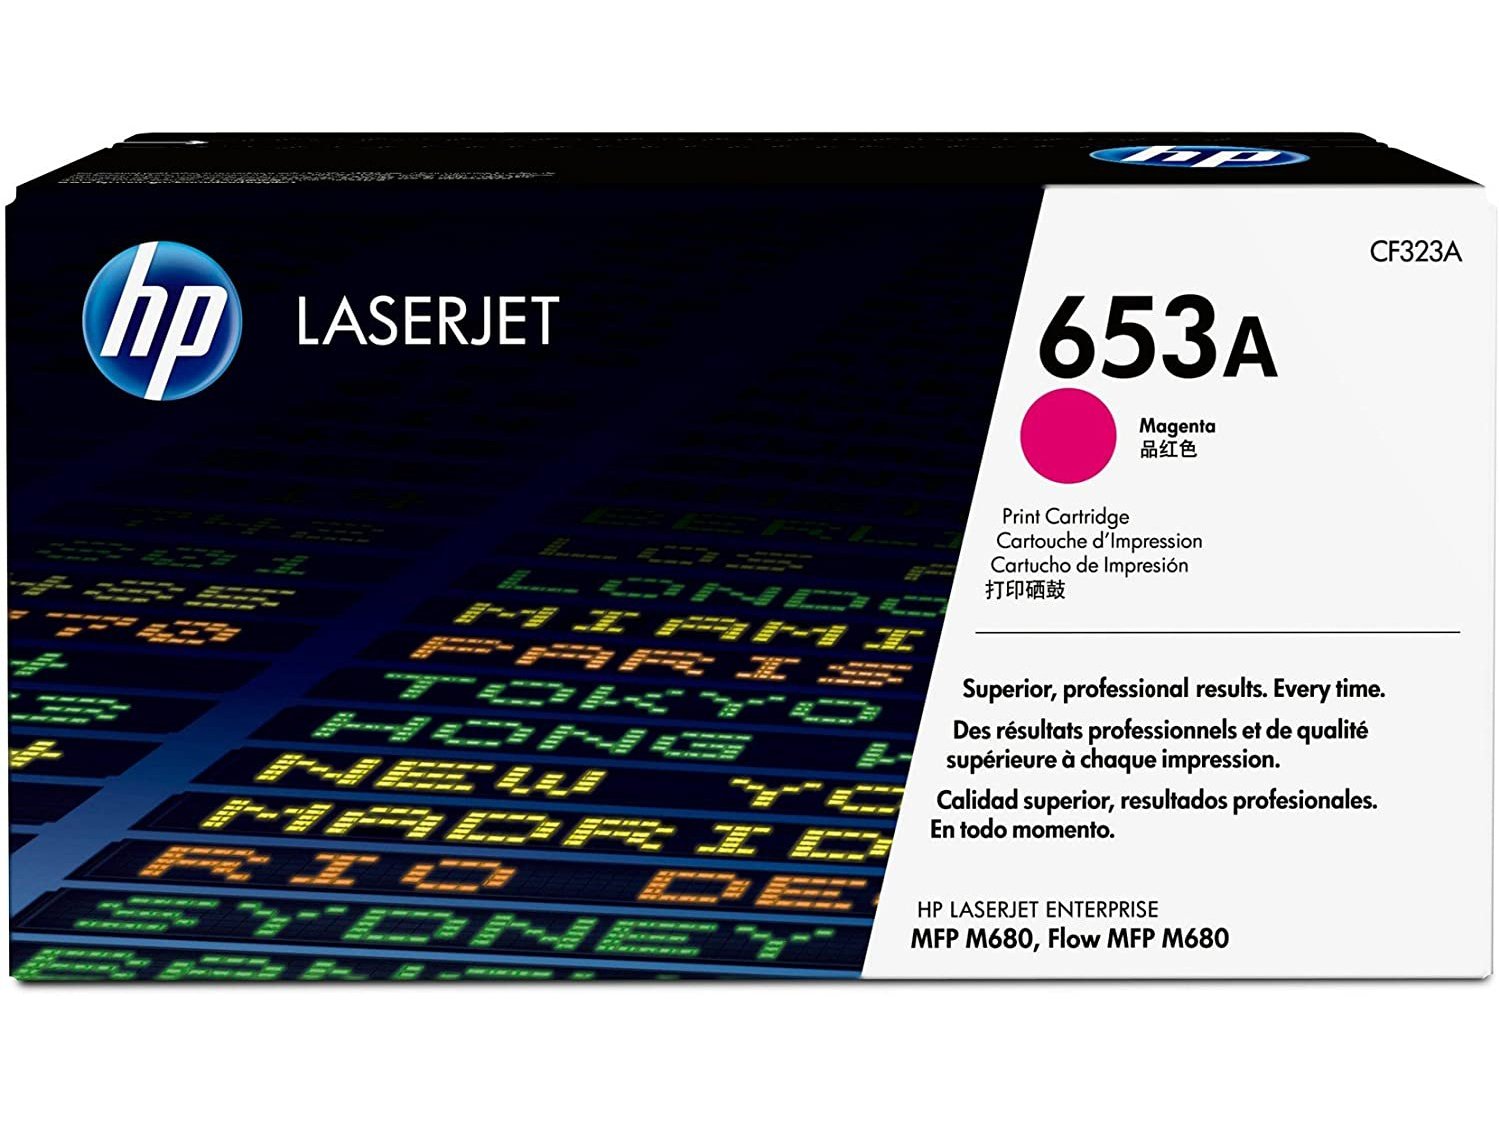 ICU Compatible/ OEM Get HP ICUCF323A Yields 16500 Pages Compatible CF323A Toner Cartridge - 653A - Magenta - Ink Cartridges USA